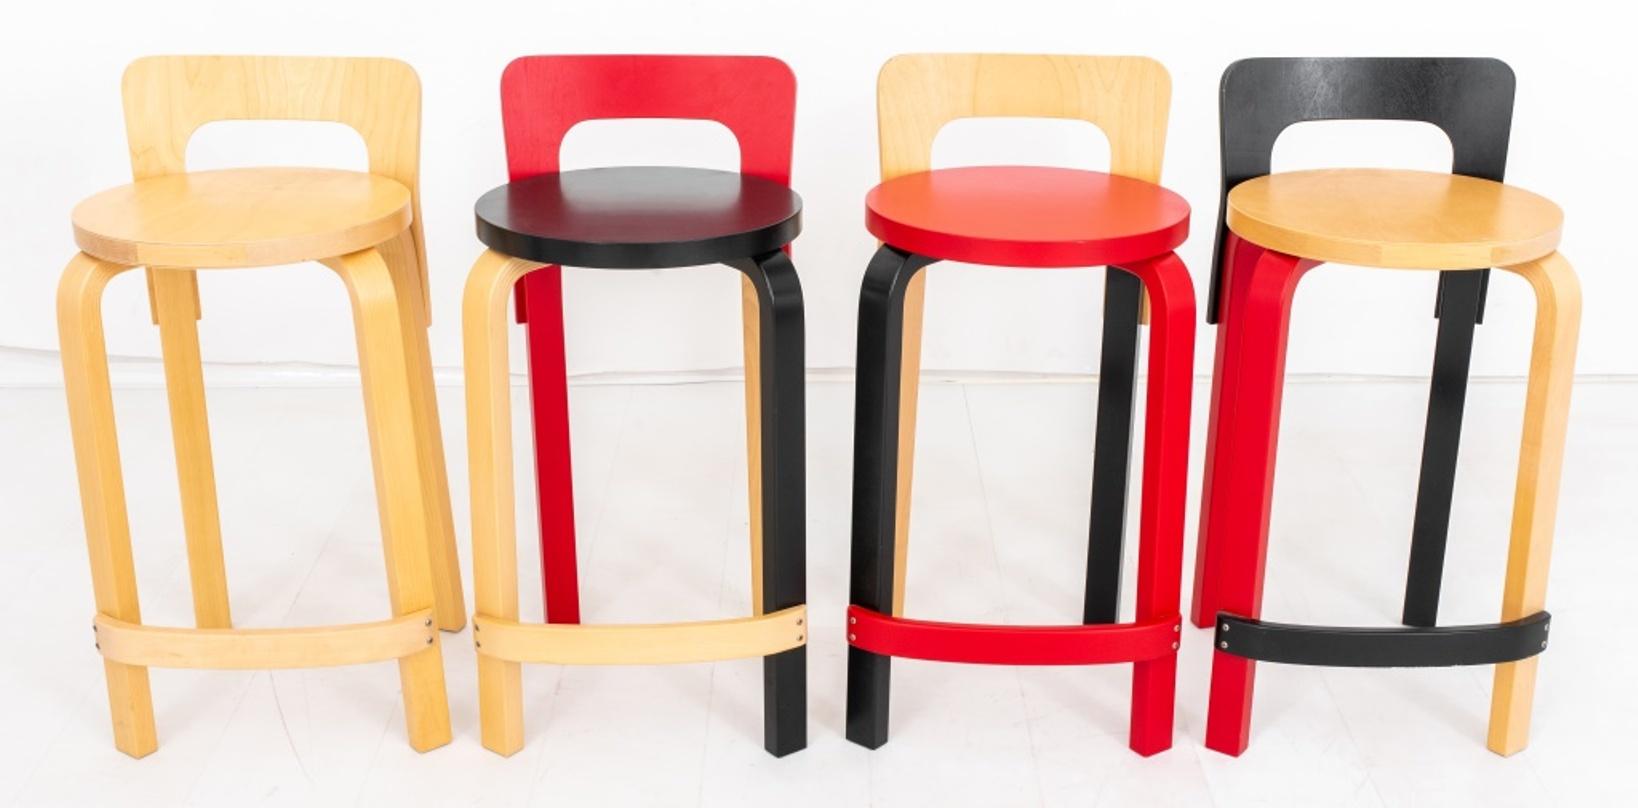 Alvar Aalto (Finish, 1898 - 1976) for Artek Mid-Century Modern set of four low back high chairs or stools in natural wood, red and black color scheme, made in 2011 and 2015, marked on bottom.

Dimensions: 28